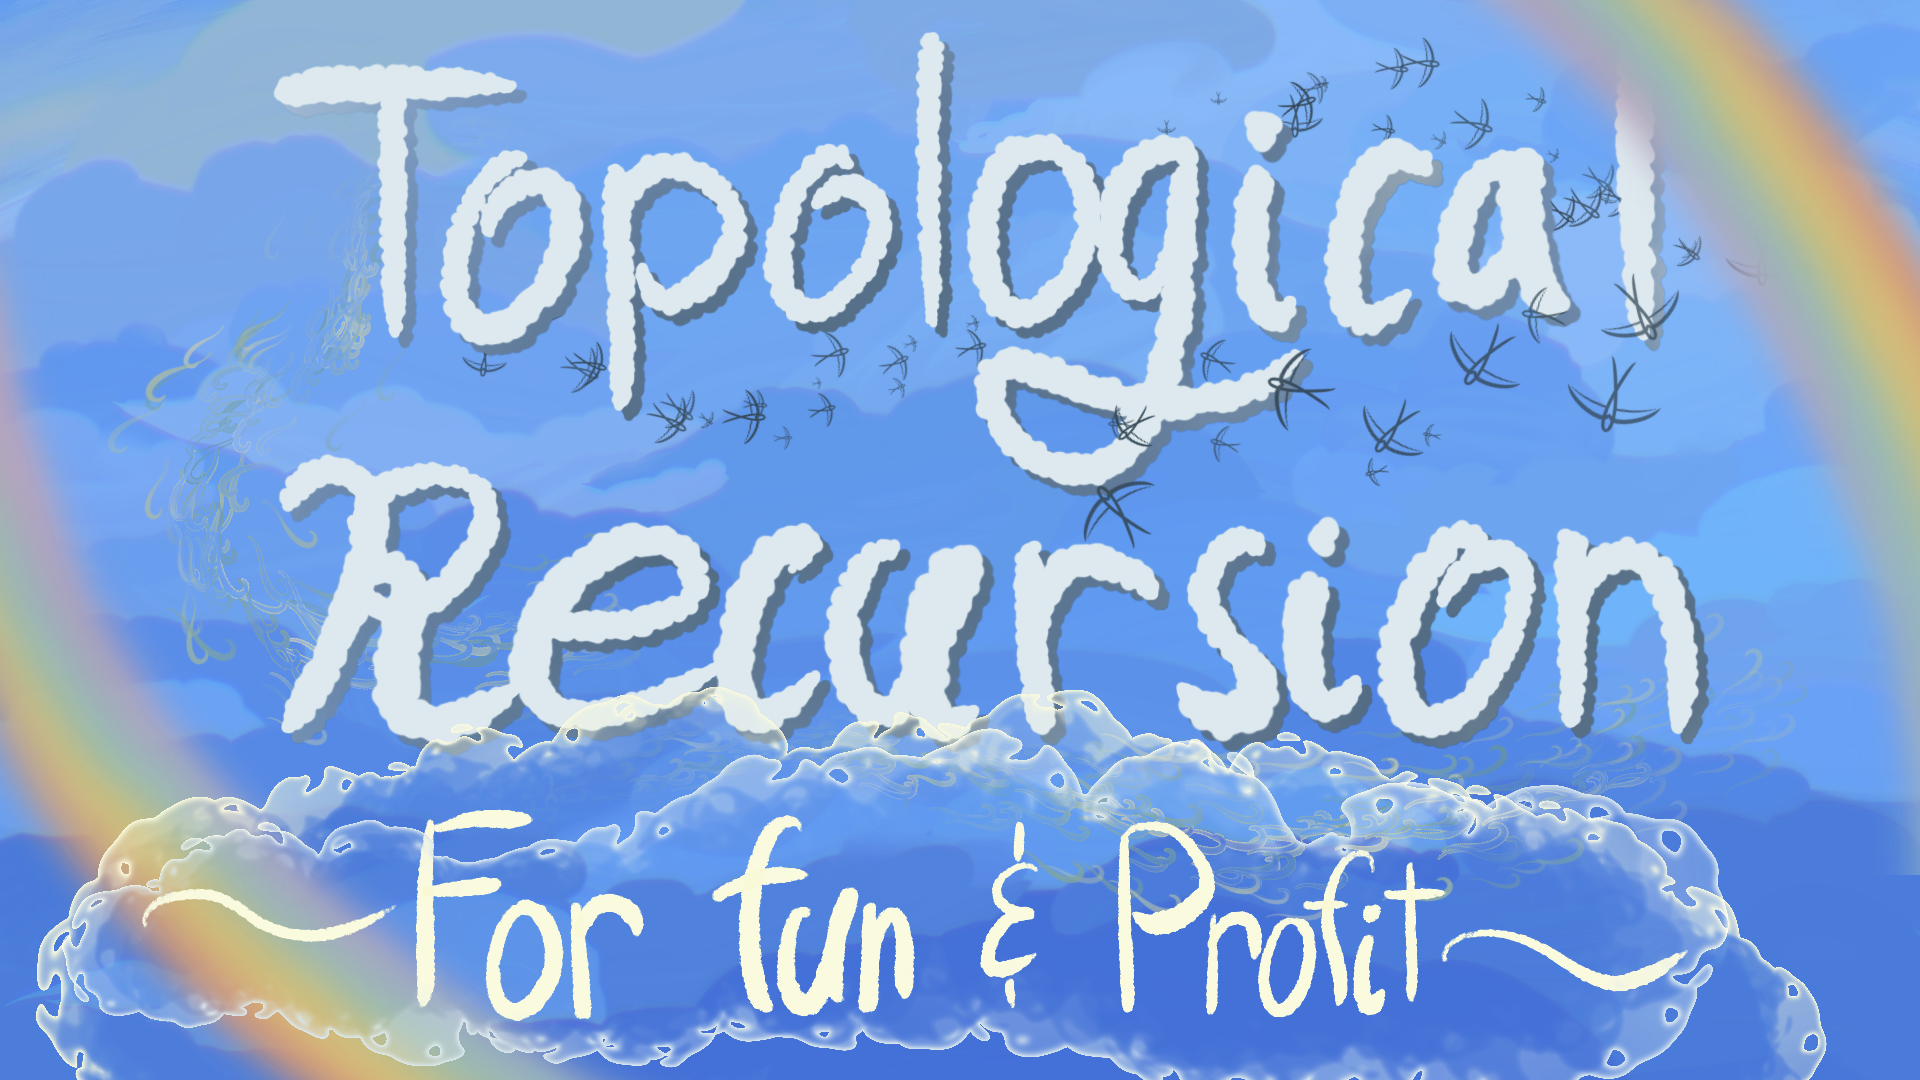 Topological recursion: For fun and profit